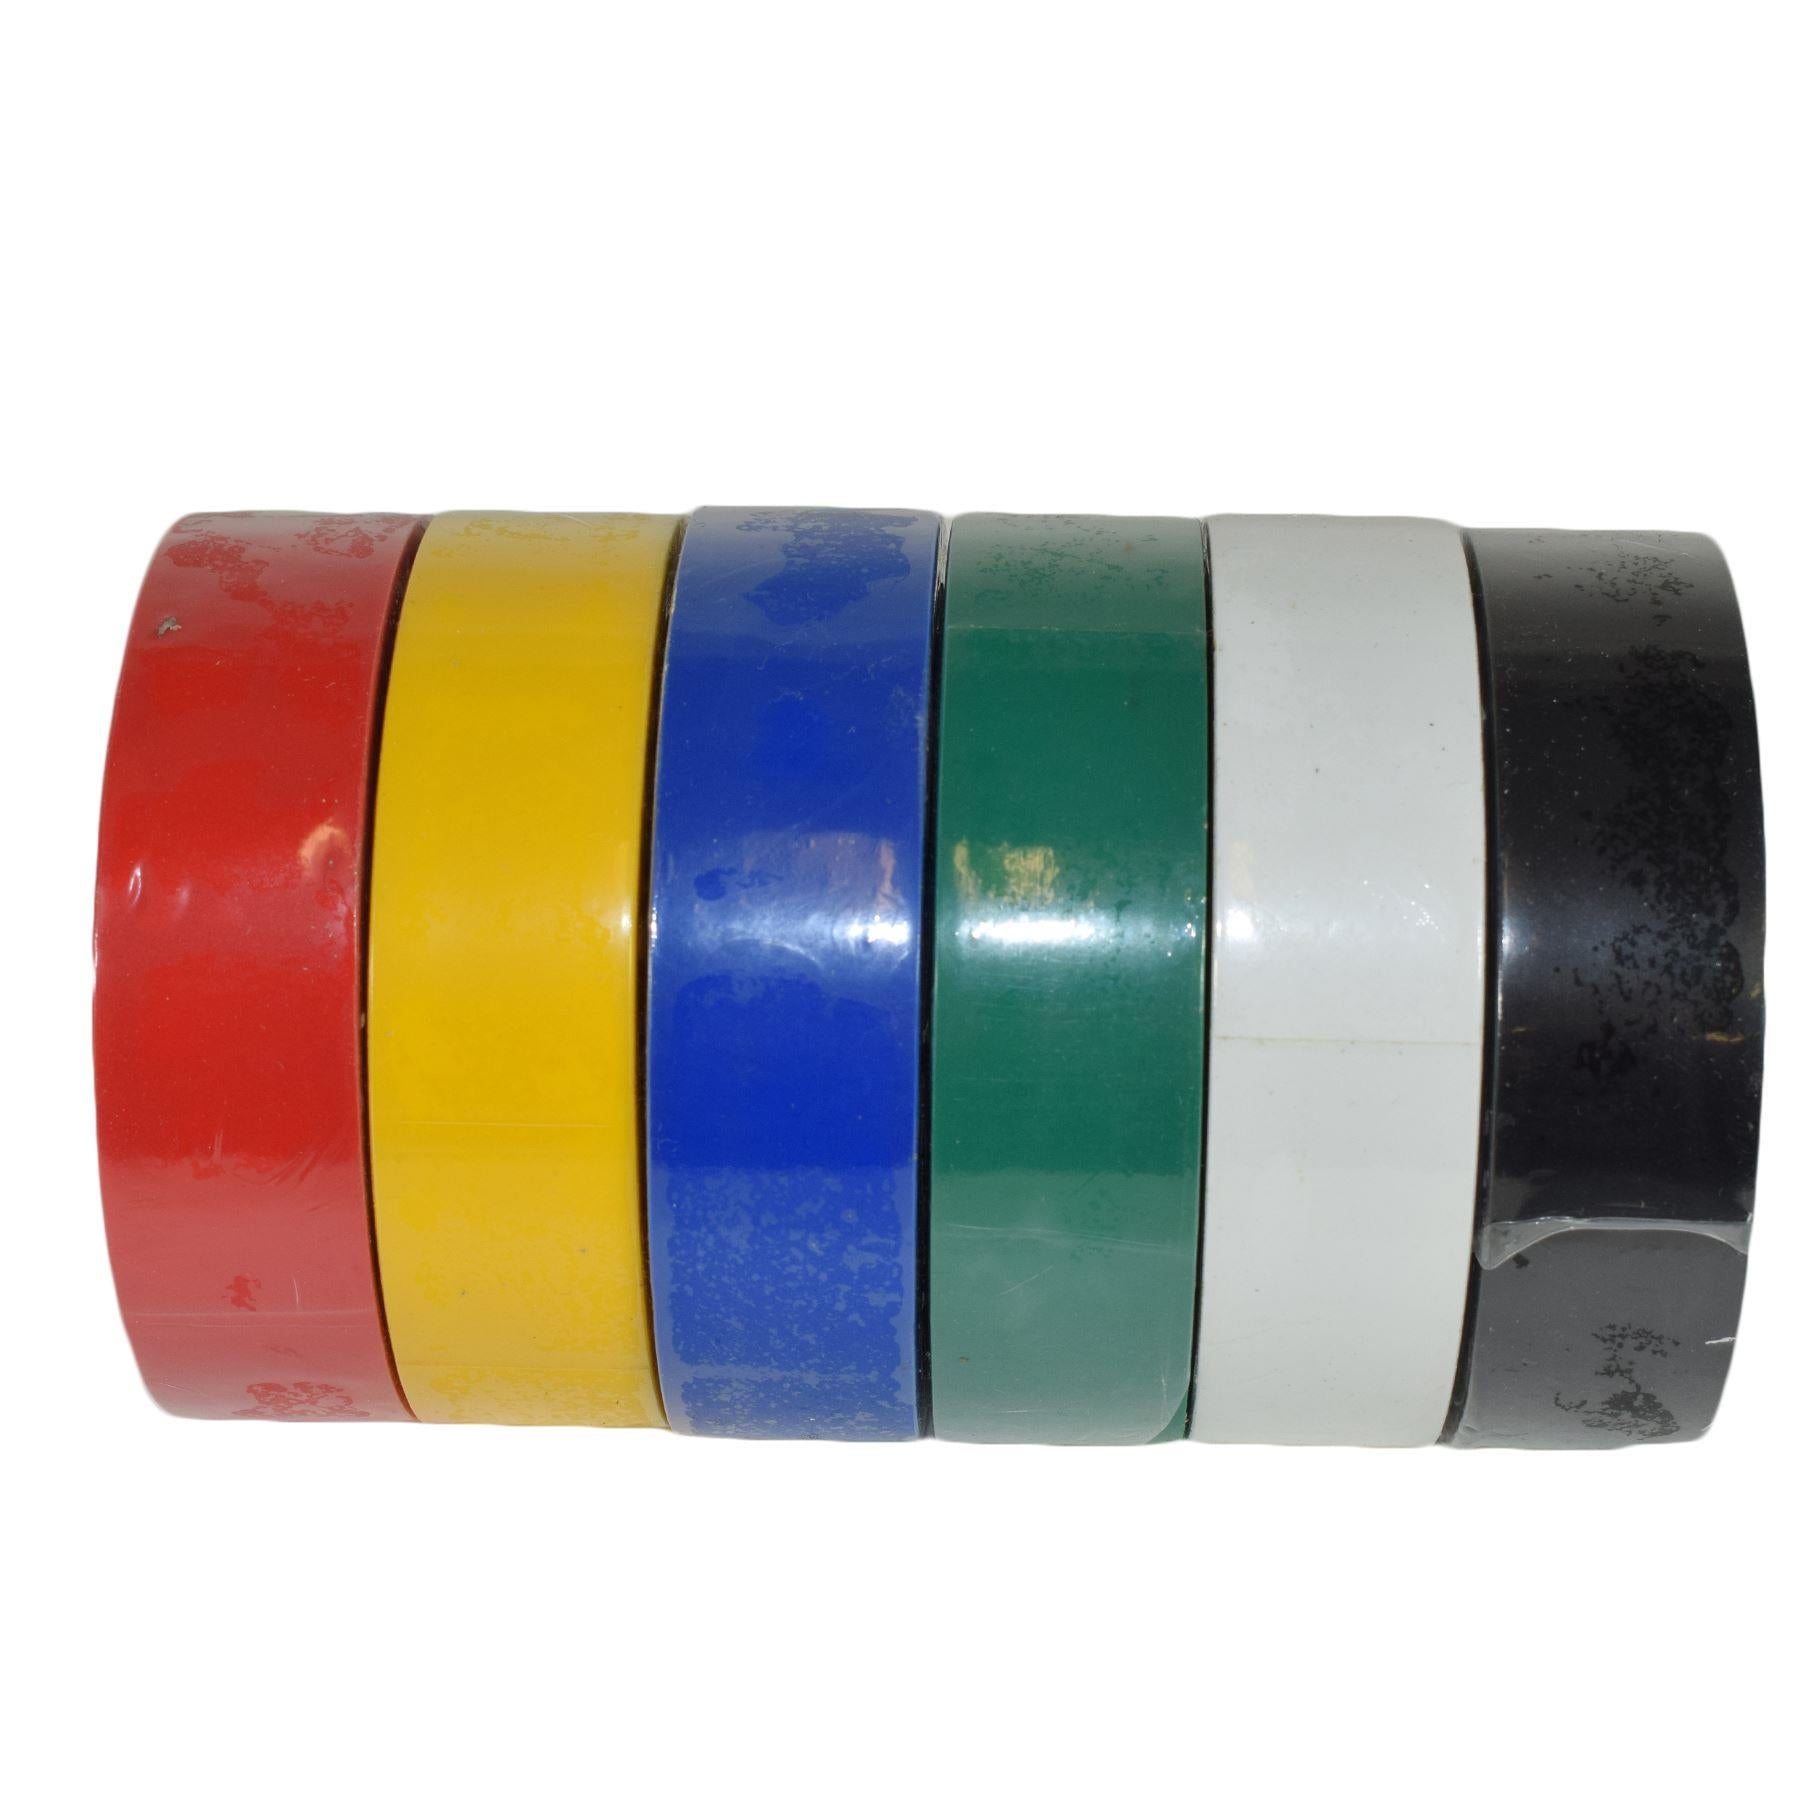 Electrical insulation tape 19mm wide x 20 metres long (pack of 10)